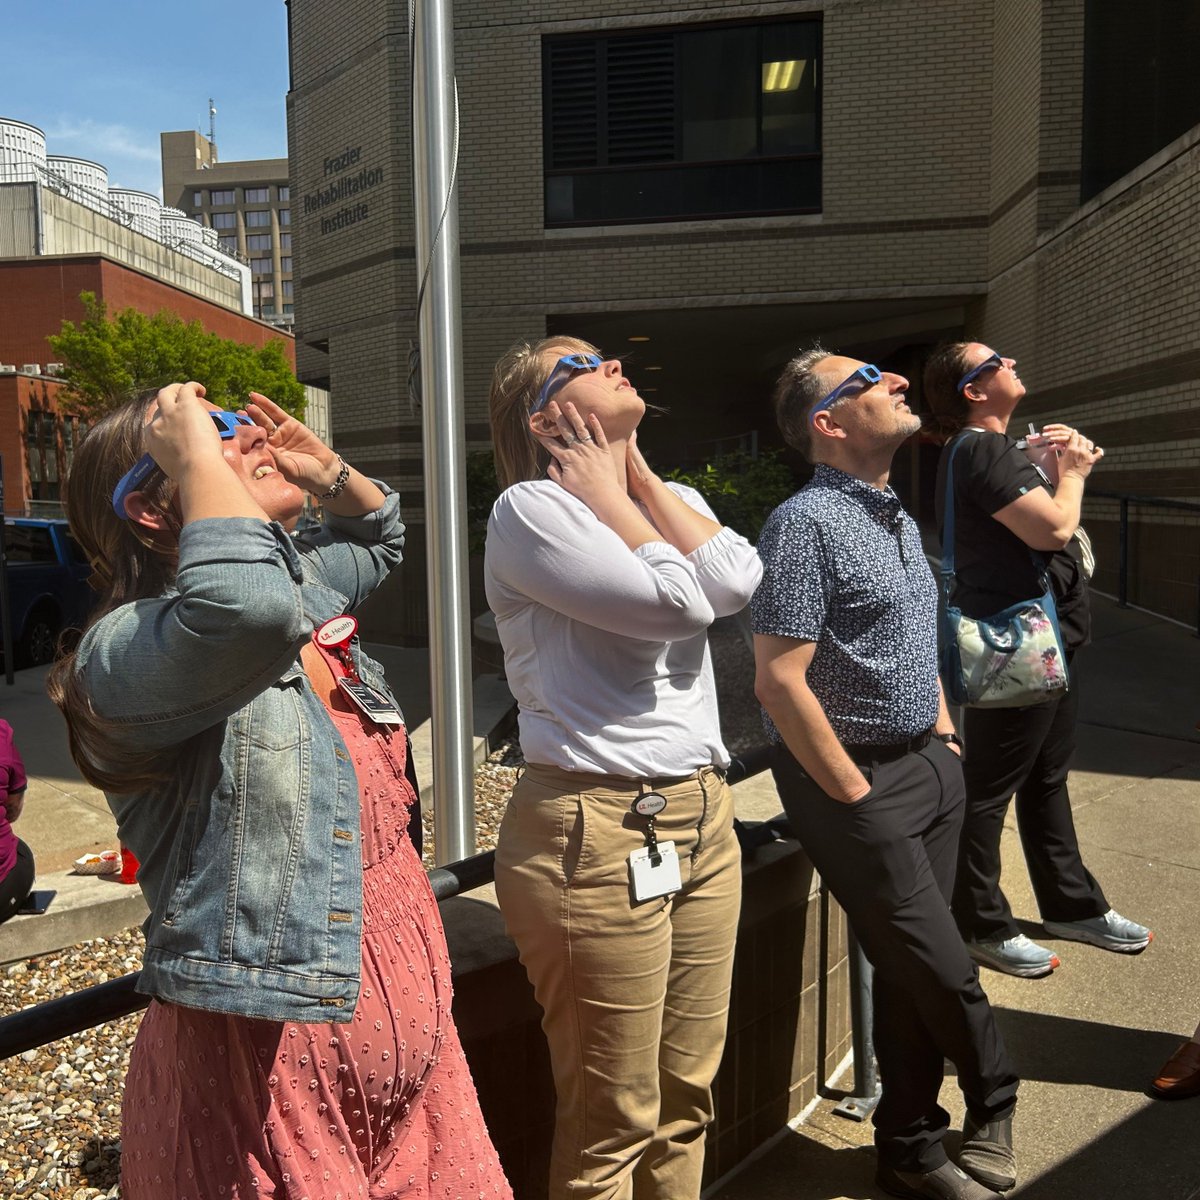 Dr. Joseph Neimat & the #UofLNeurosurgery administrative staff checking out today's #SolarEclipse. It was such a cool experience! #Eclipse2024